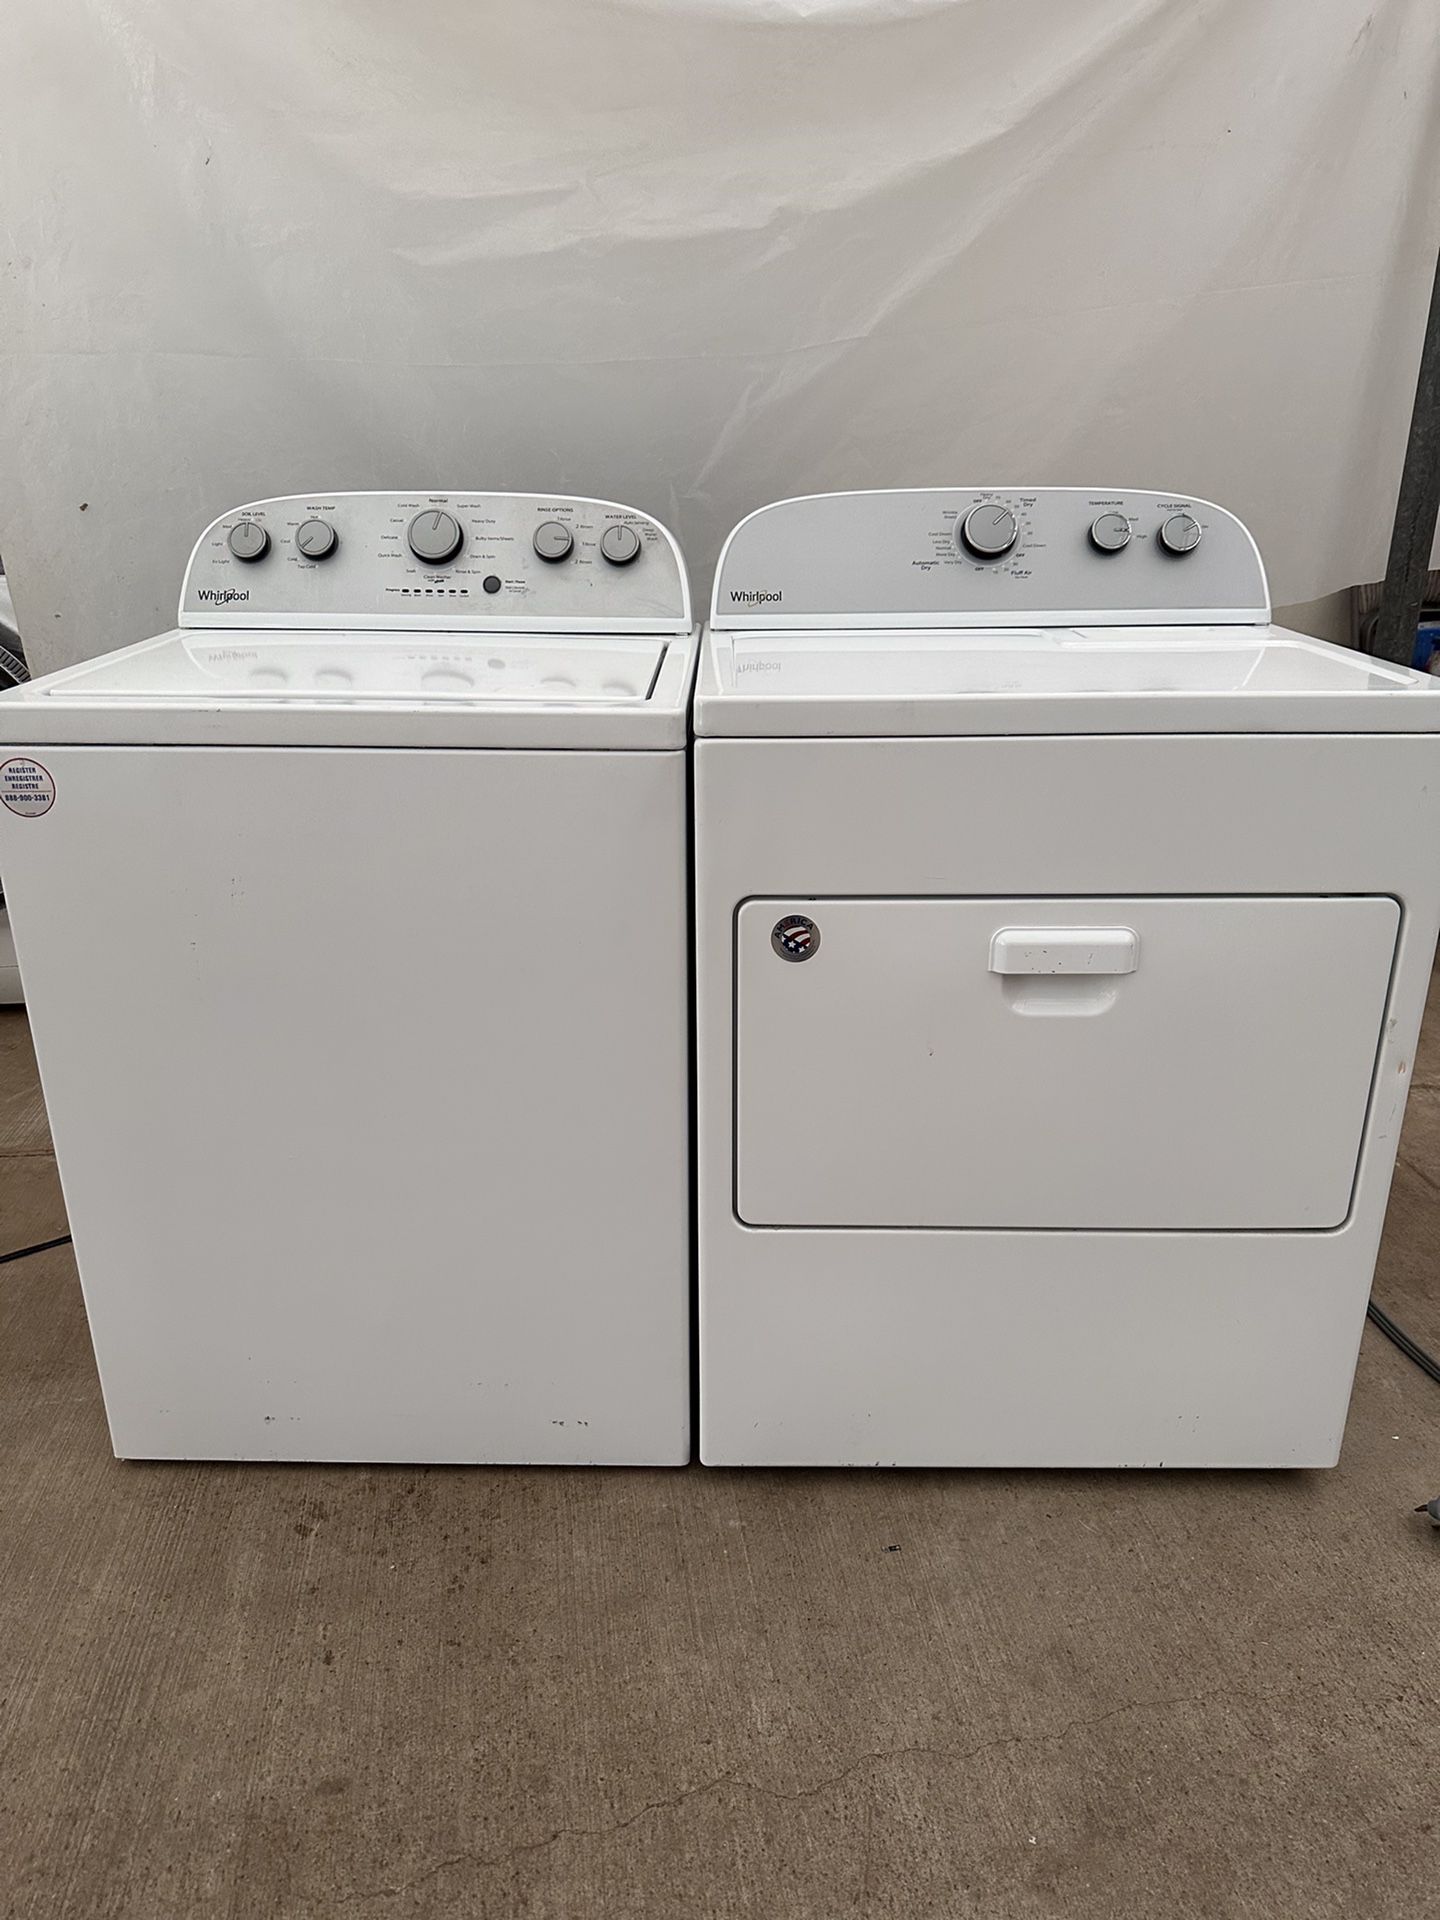 Whirlpool Washer And Gas Dryer Laundry Set 